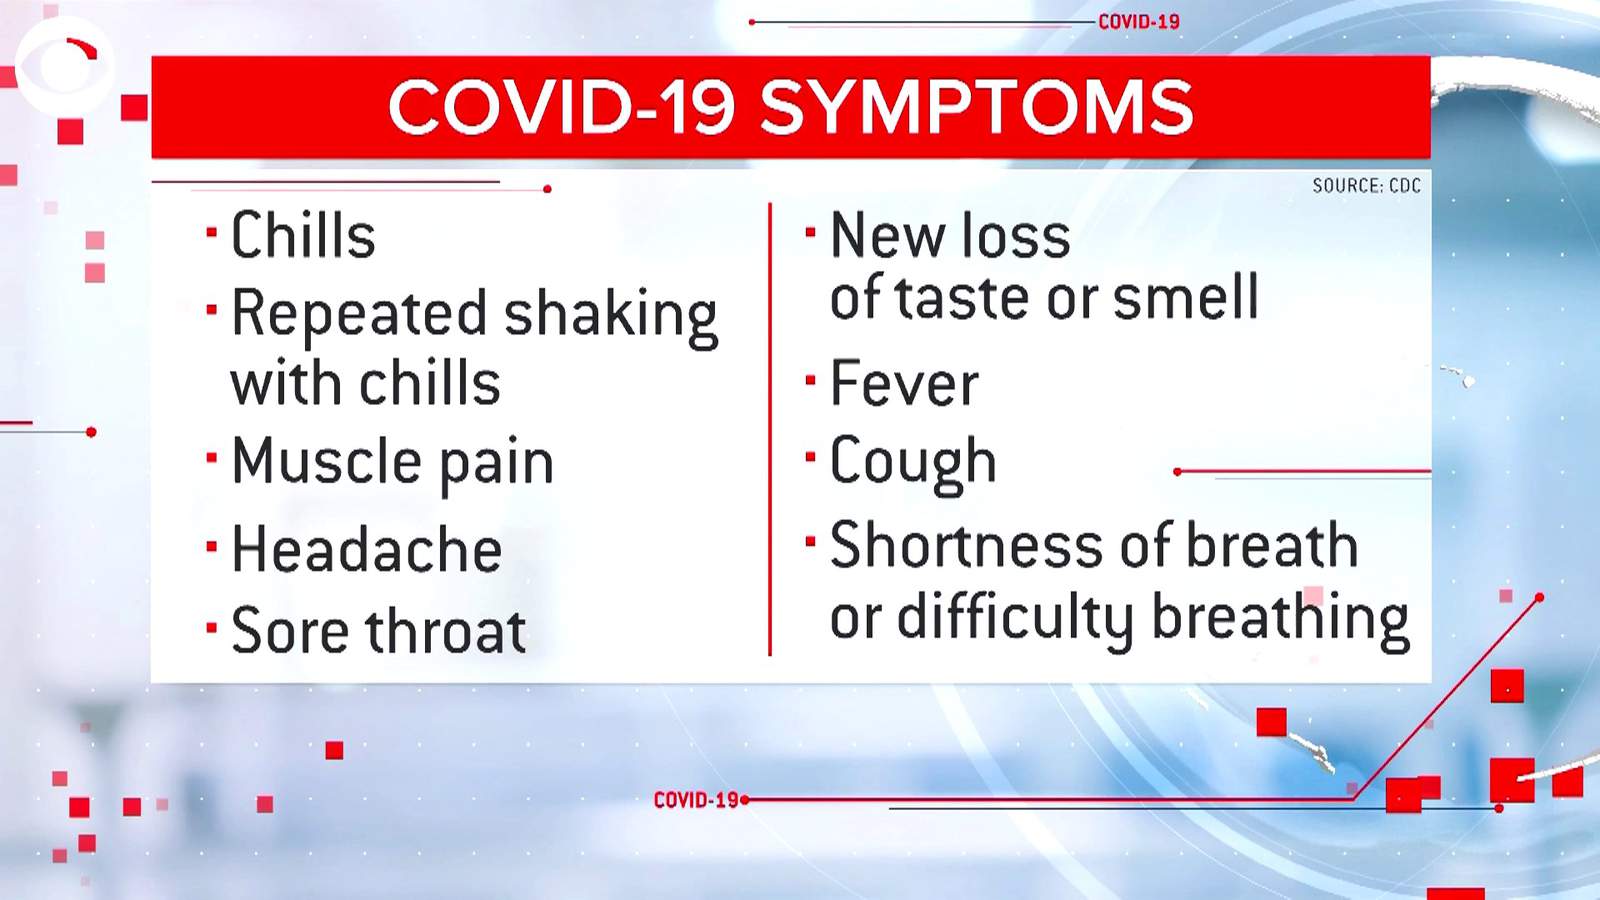 CDC expands list of coronavirus symptoms. Here’s what to look for